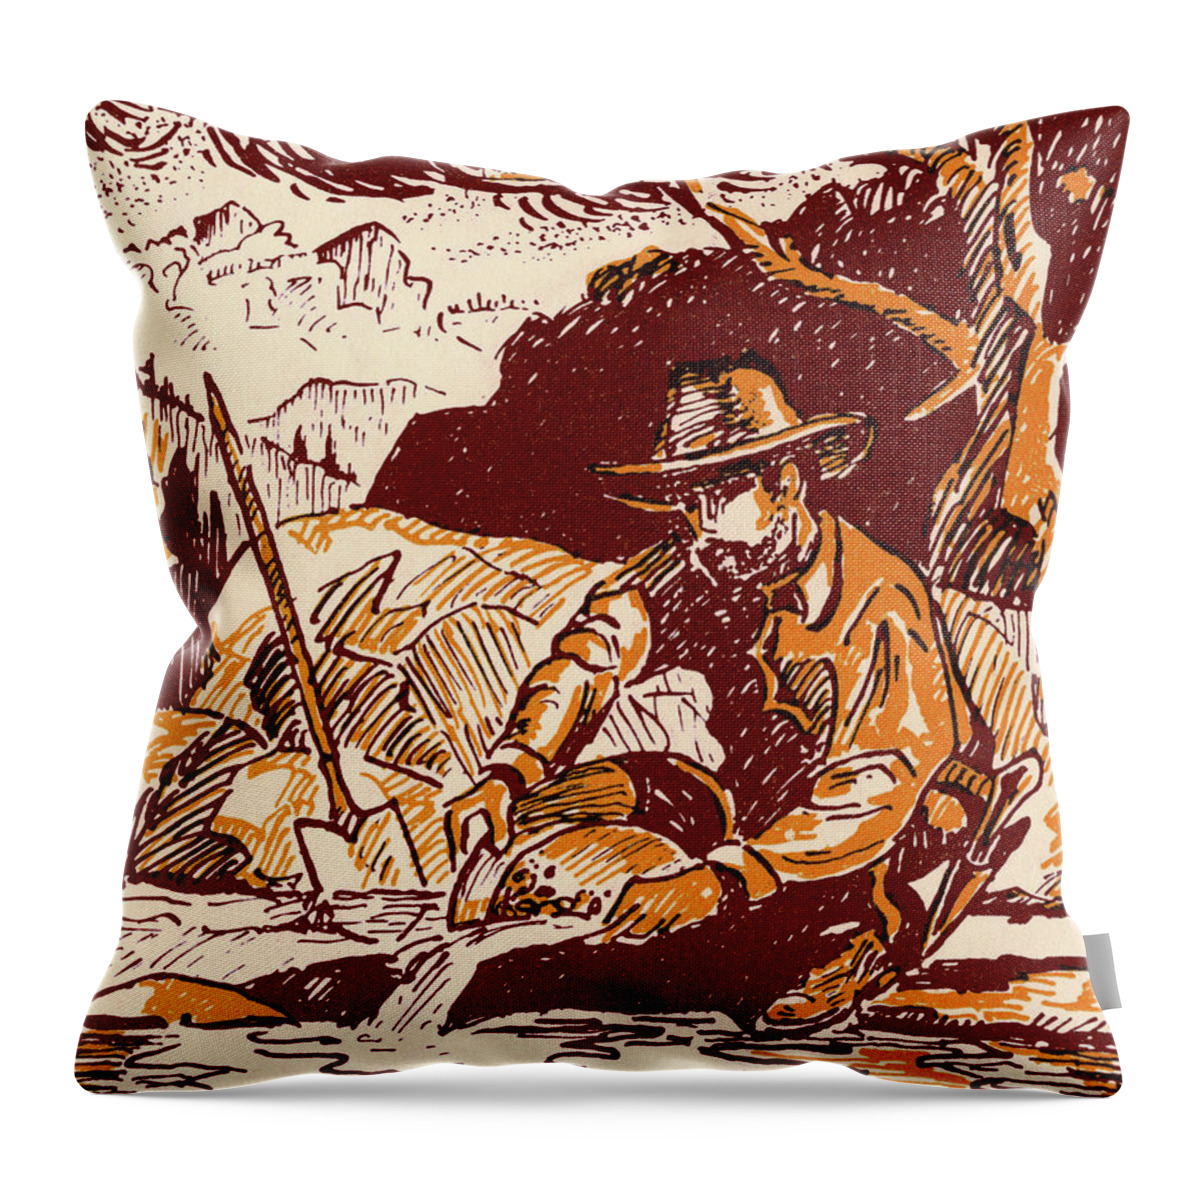 Accessories Throw Pillow featuring the drawing Man Panning For Gold by CSA Images